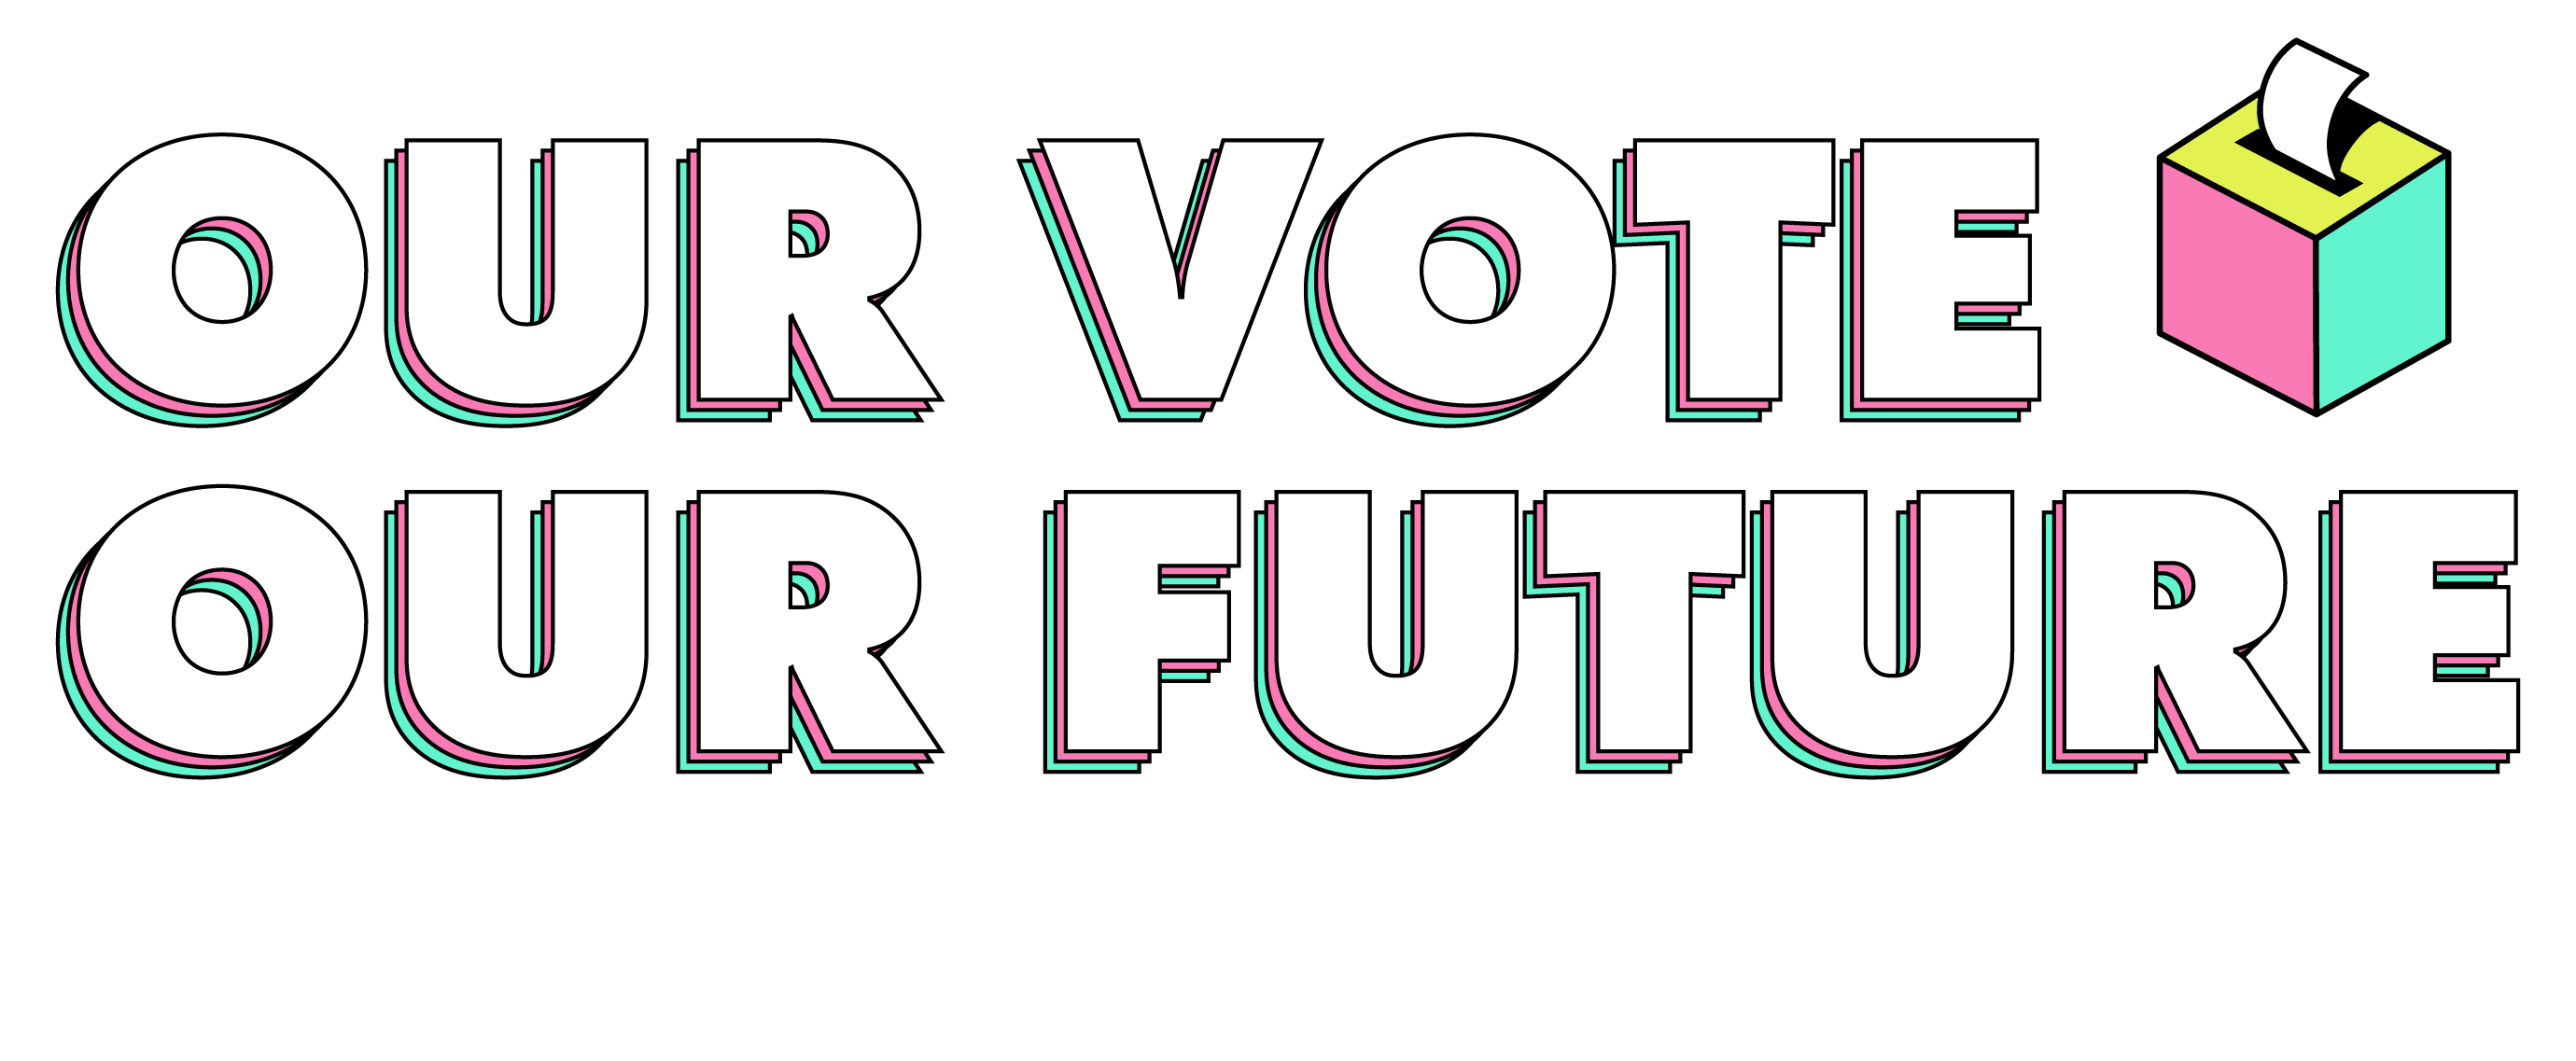 Our Vote. Our Futue. The power is in our hands if we act.